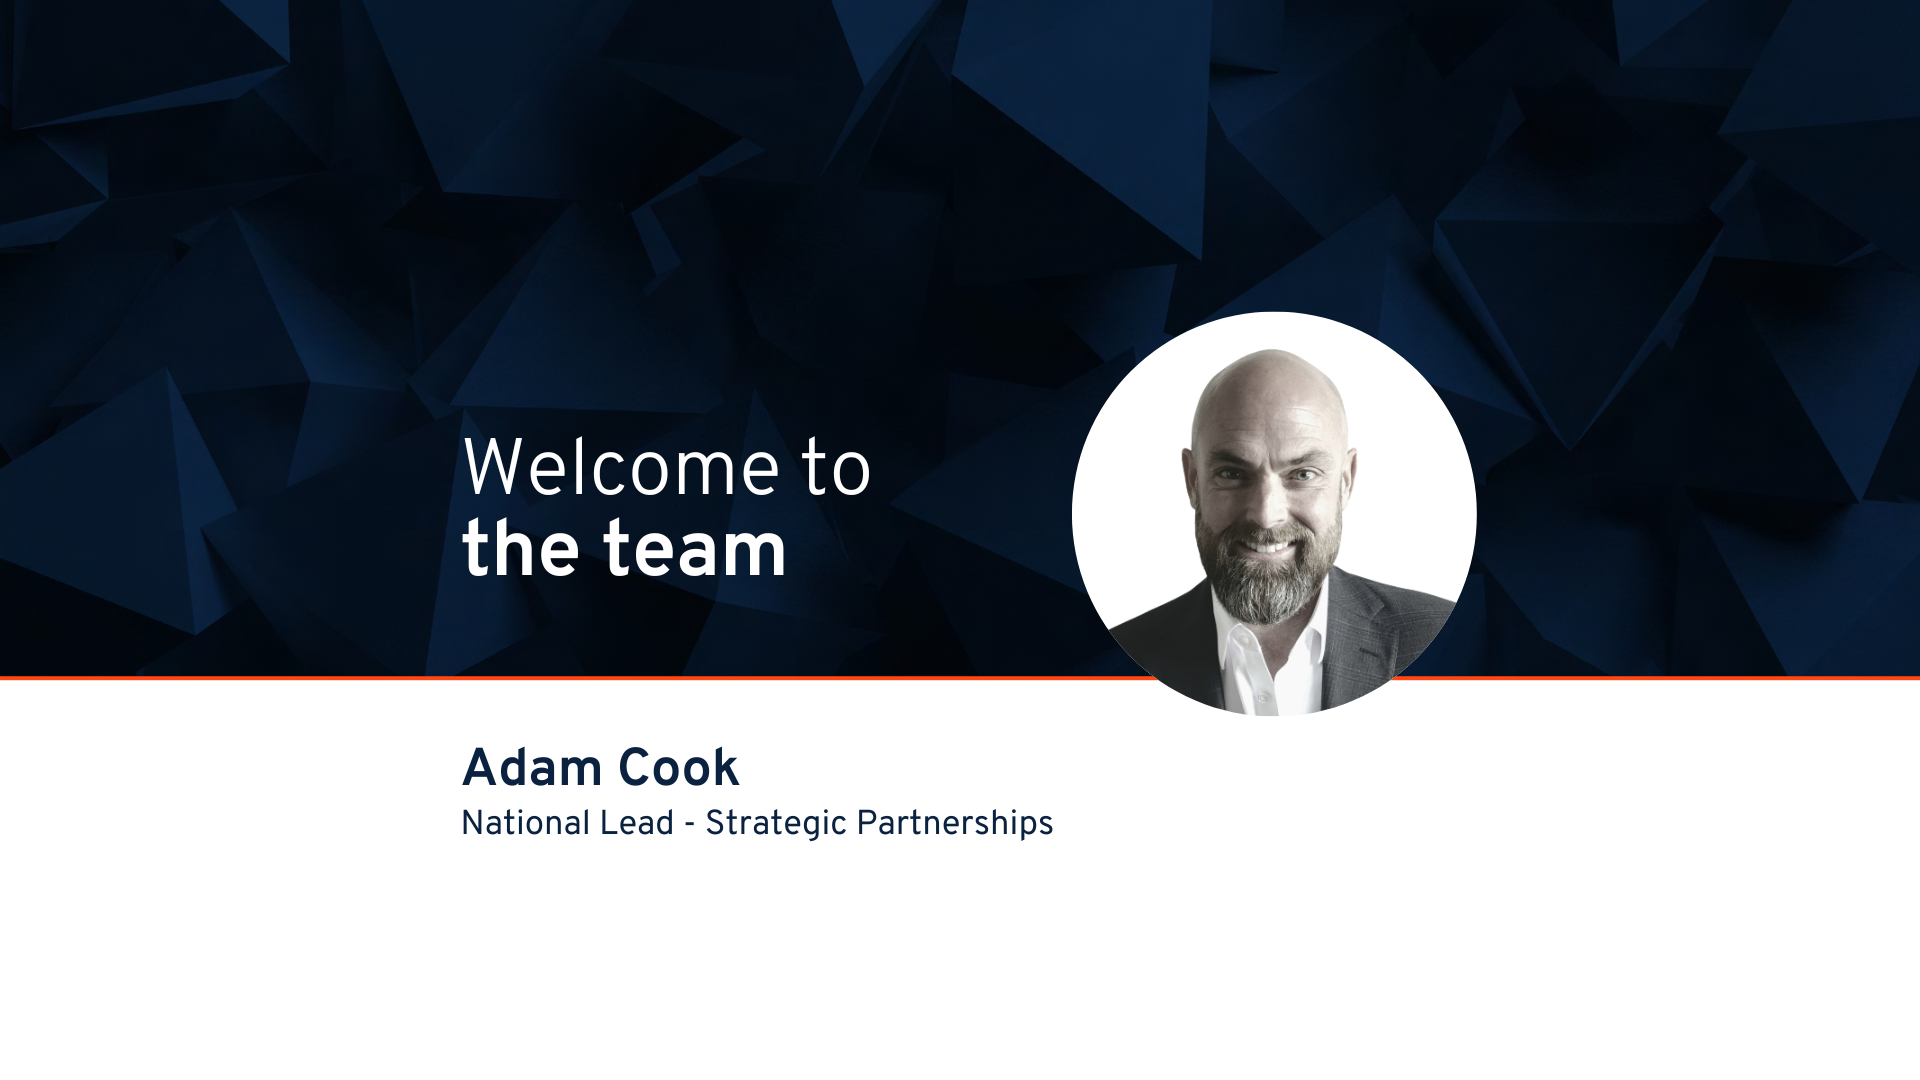 Davidson appoints Adam Cook as national lead for Strategic Partnerships